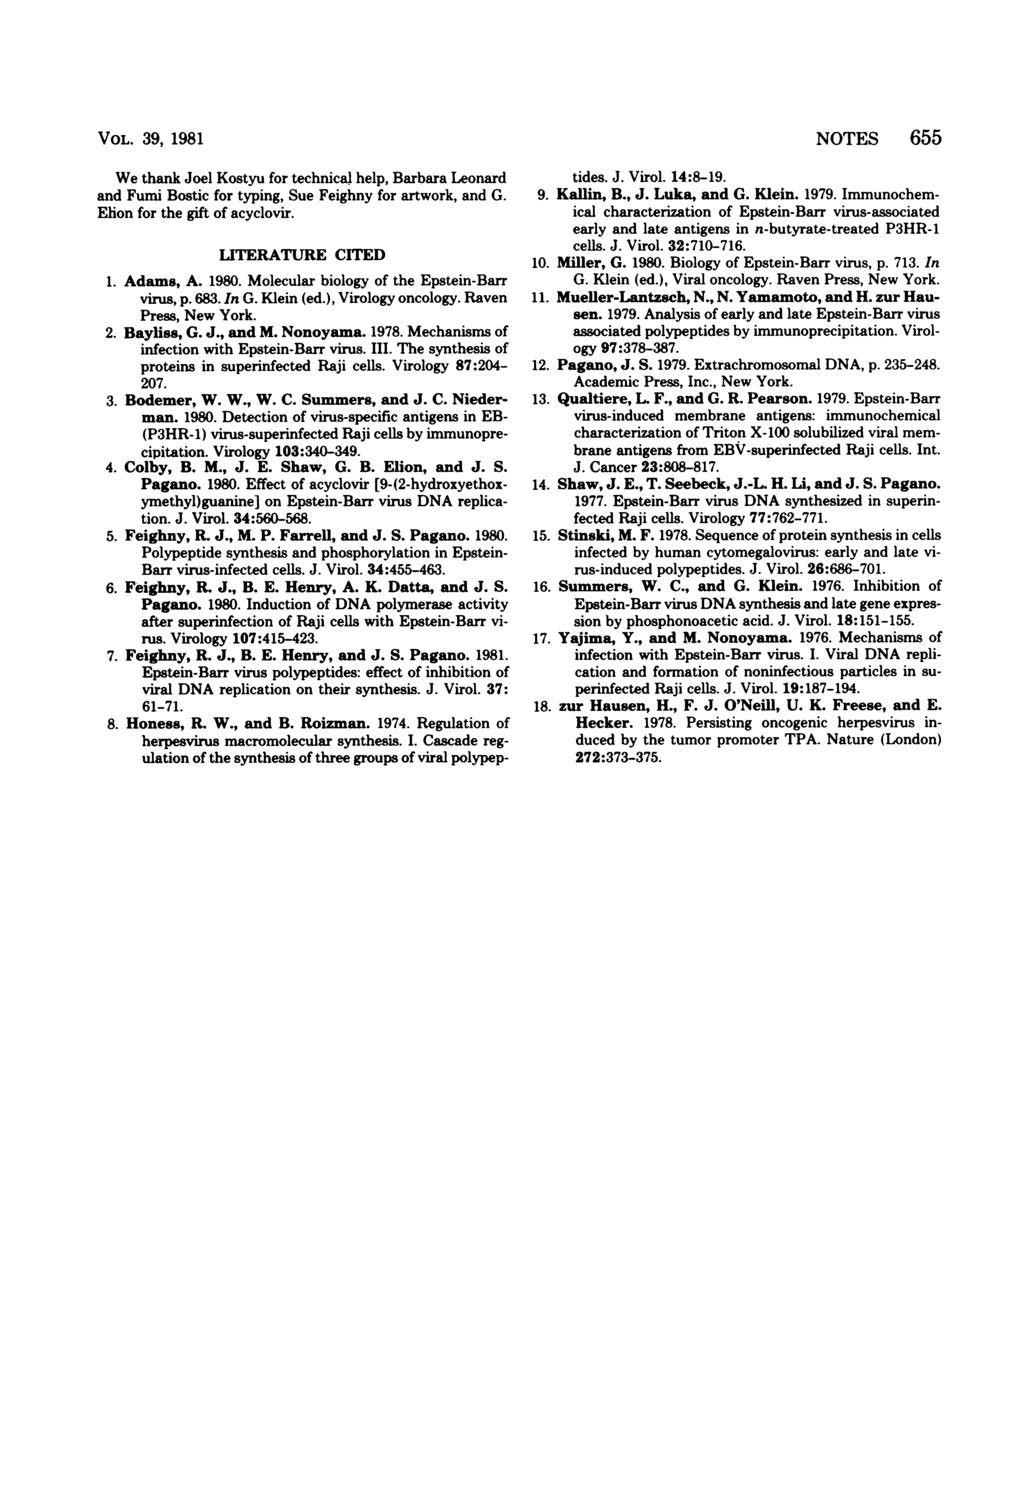 VOL. 39, 1981 We thank Joel Kostyu for technical help, Barbara Leonard and Fumi Bostic for typing, Sue Feighny for artwork, and G. Ehon for the gift of acyclovir. LITERATURE CITED 1. Adams, A. 1980.